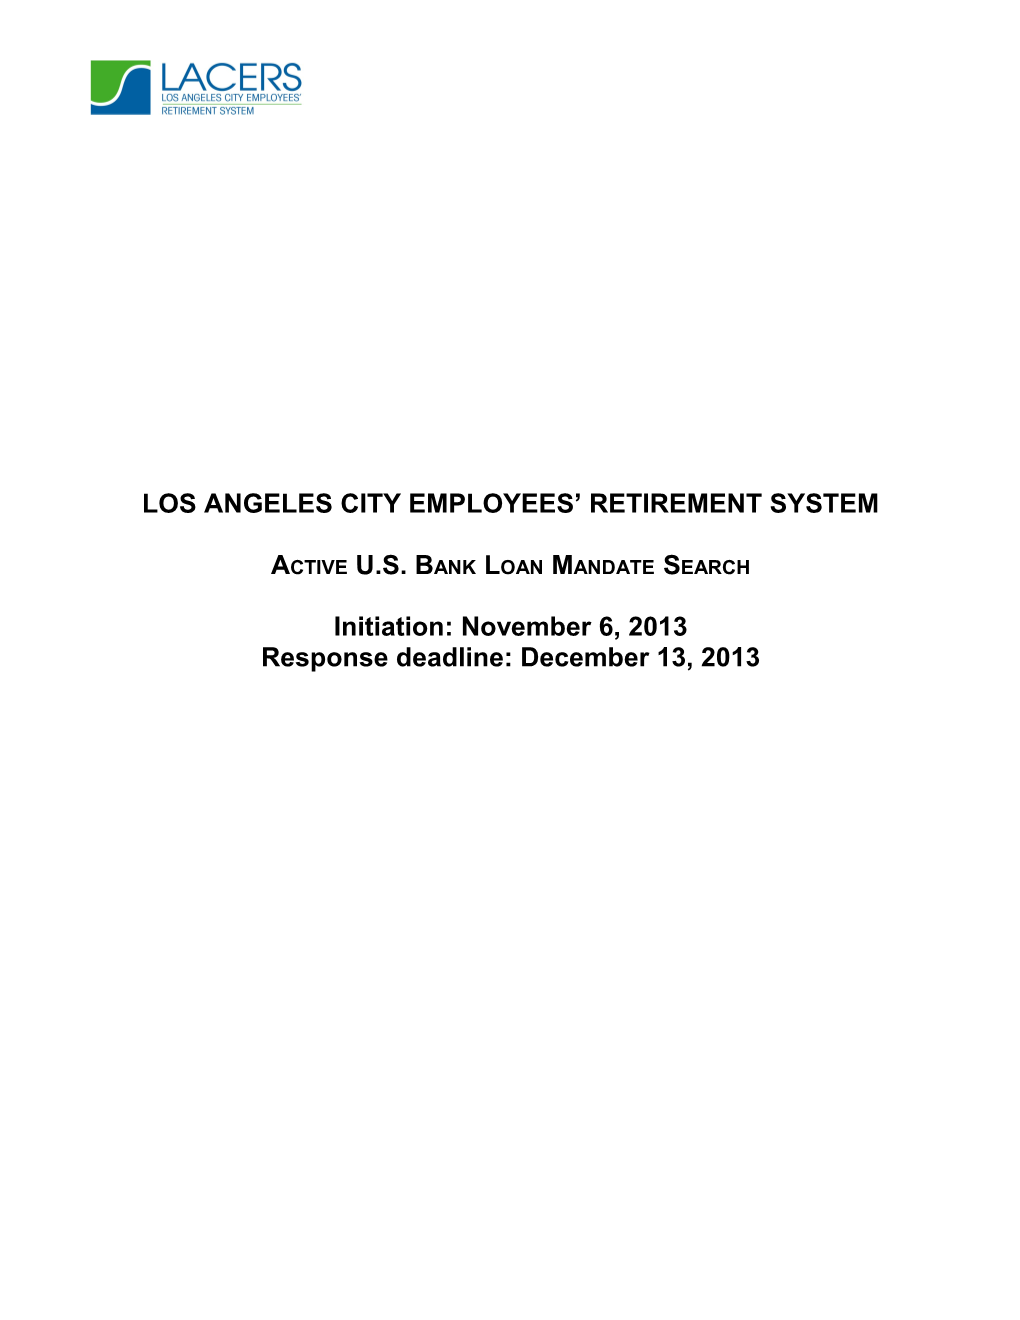 Los Angeles City Employees Retirement System